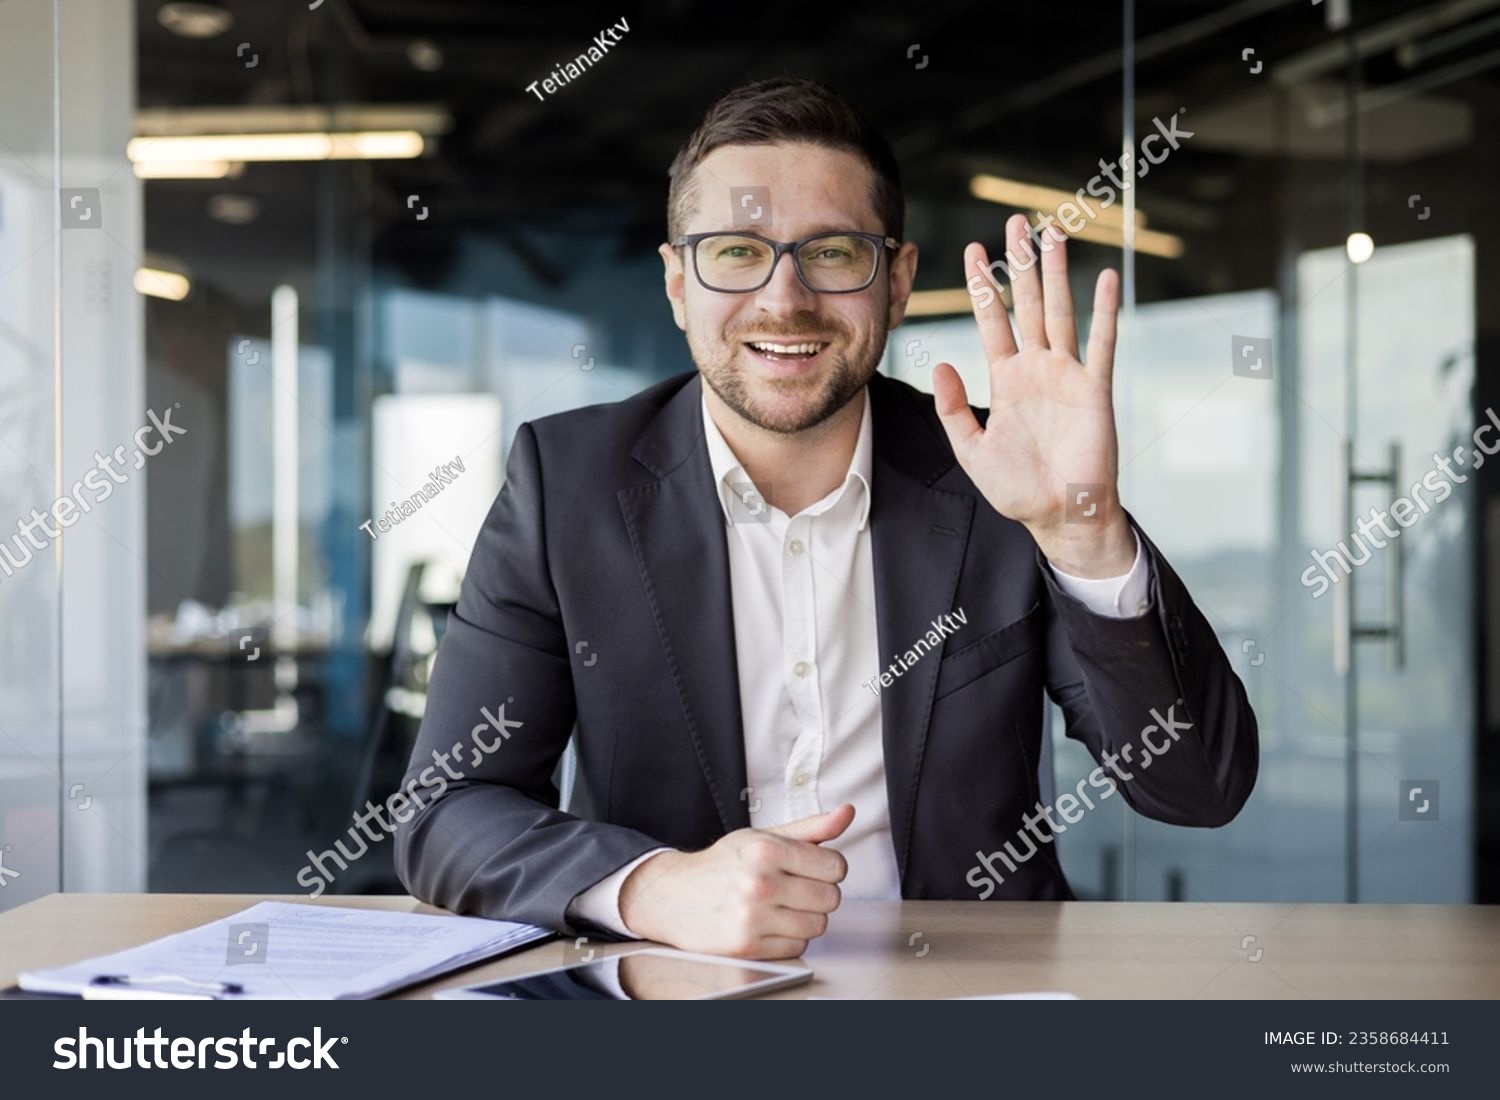 Portrait of a young businessman in a suit who sits in the office in front of the camera, communicates online, greets with his hand. #2358684411